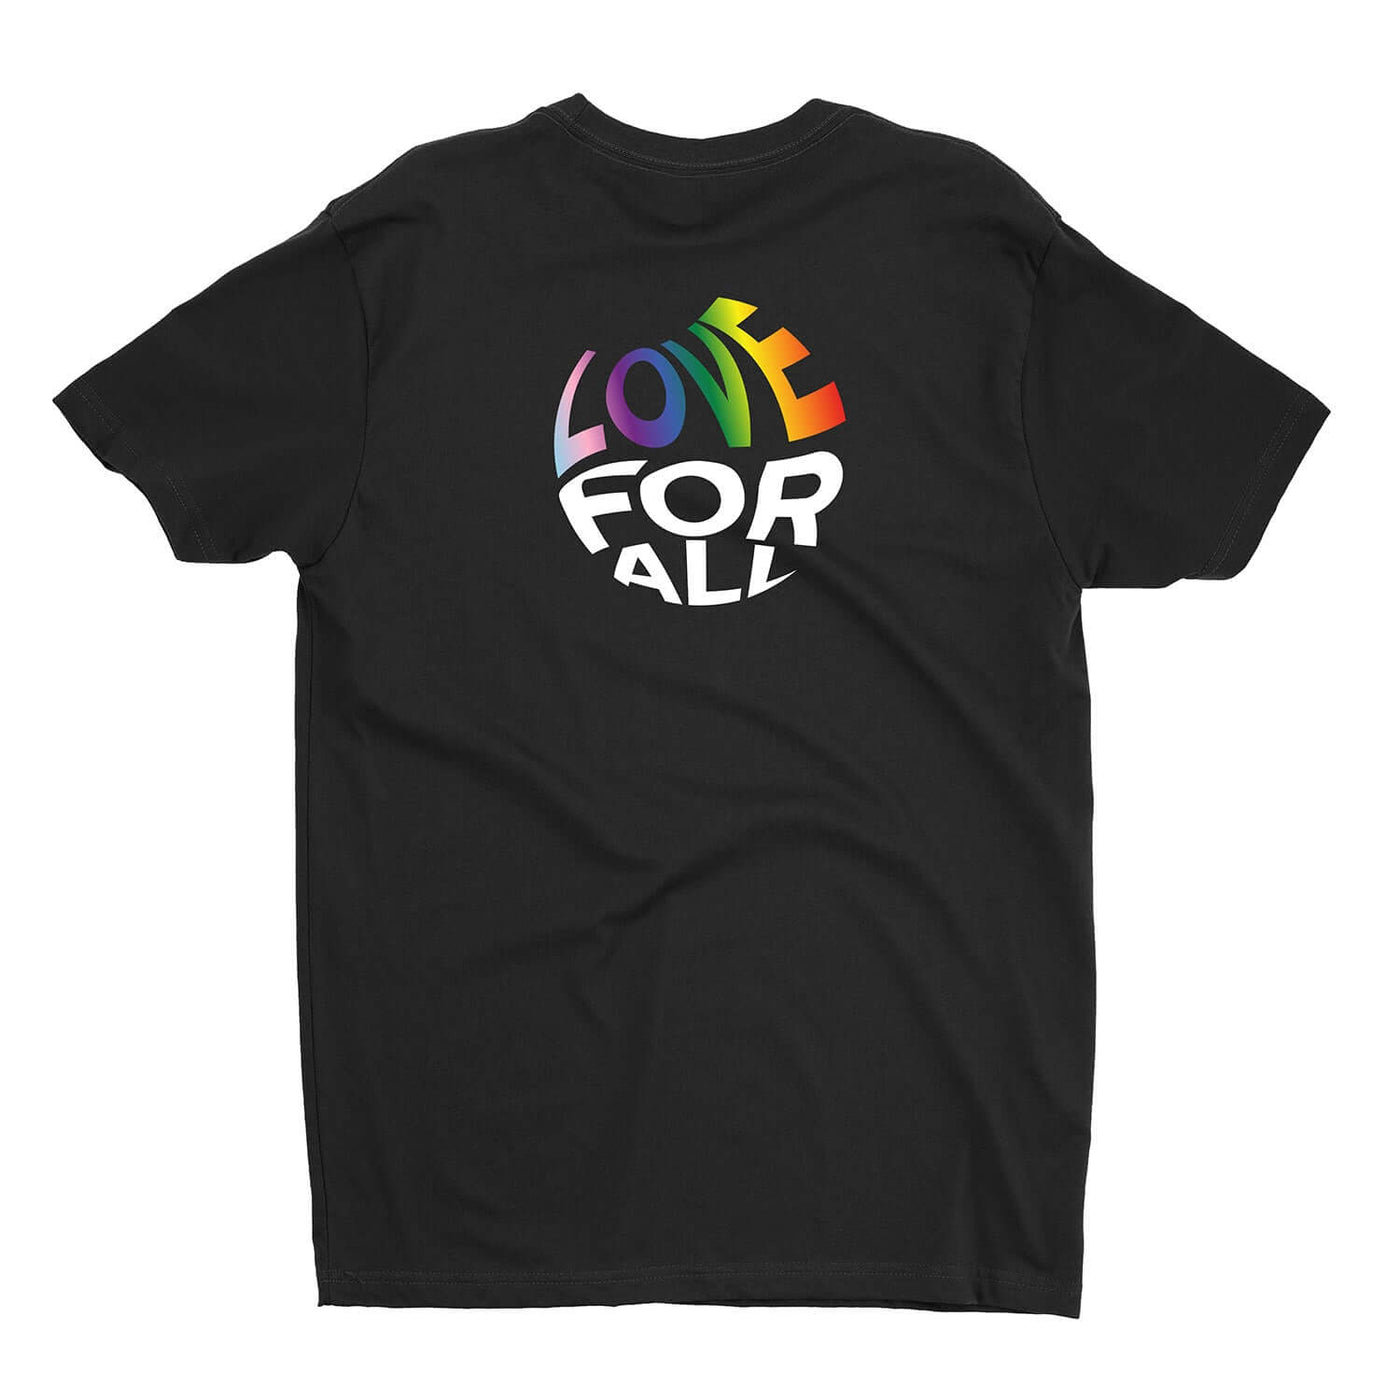 All For Love Tee - Only Human